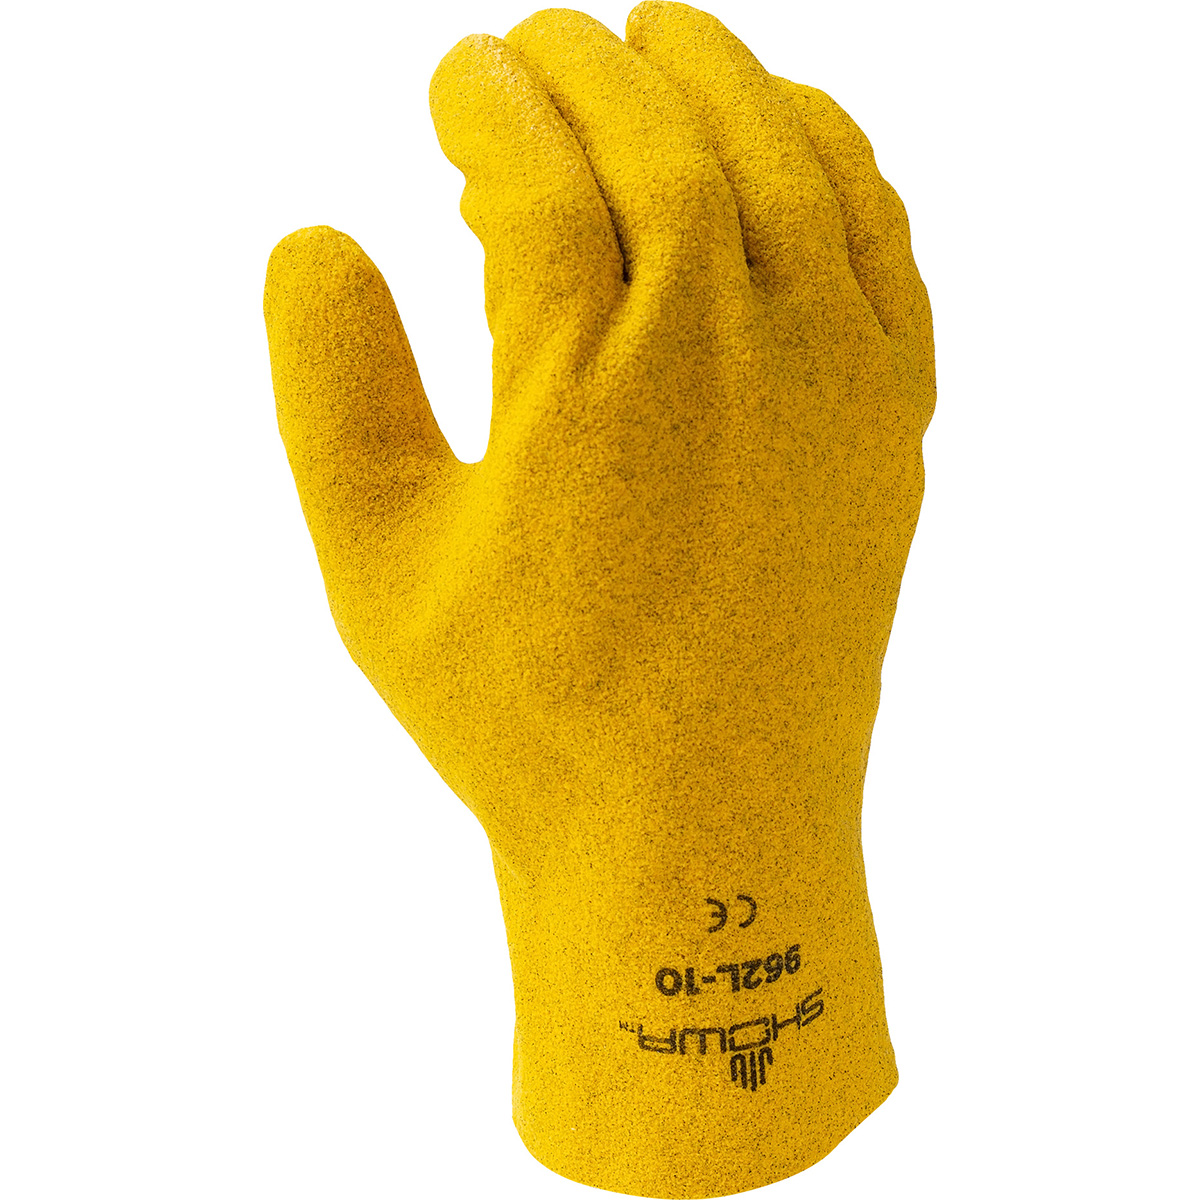 General purpose PVC fully coated, yellow, jersey liner, slip-on, small